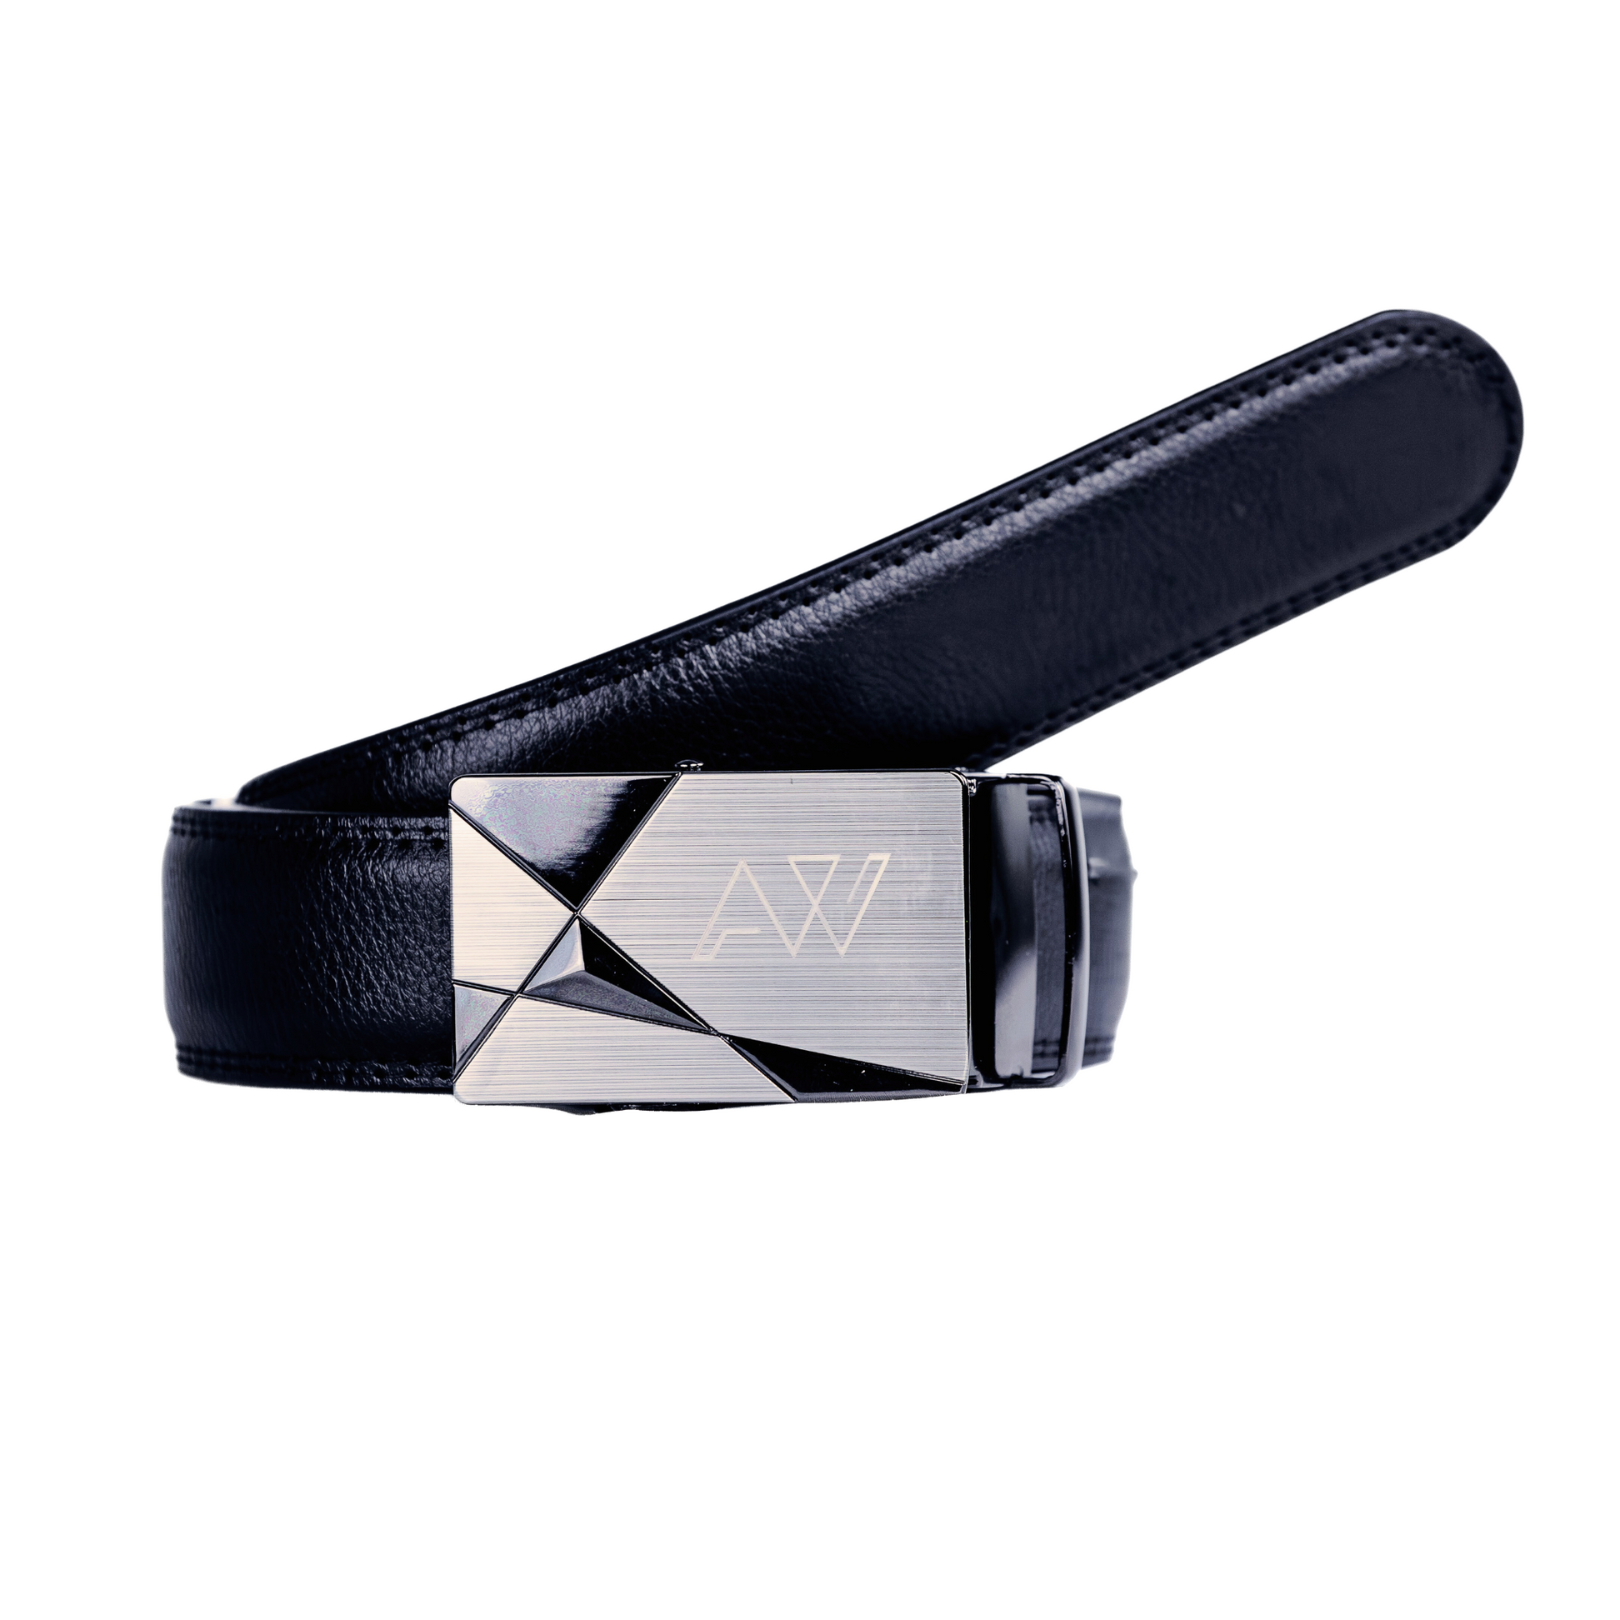 Automatic Roller Buckle Full-Grain Leather Belt